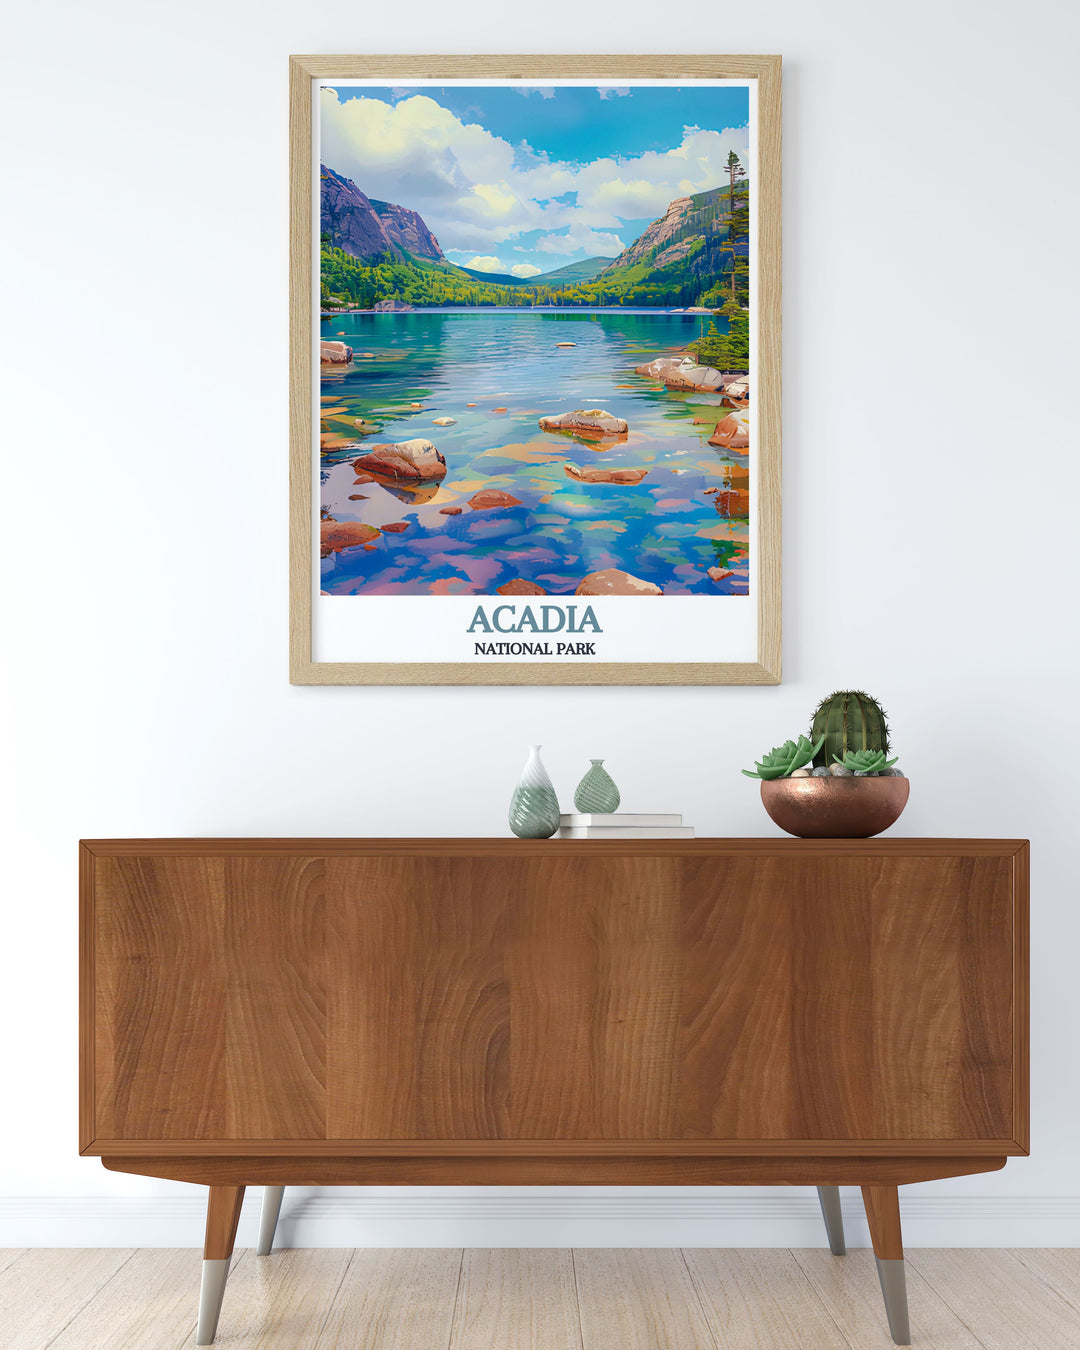 Captivating Acadia National Park print featuring the iconic Jordan Pond this artwork brings a touch of wilderness to your living space perfect for anyone who appreciates national park prints and retro travel art.